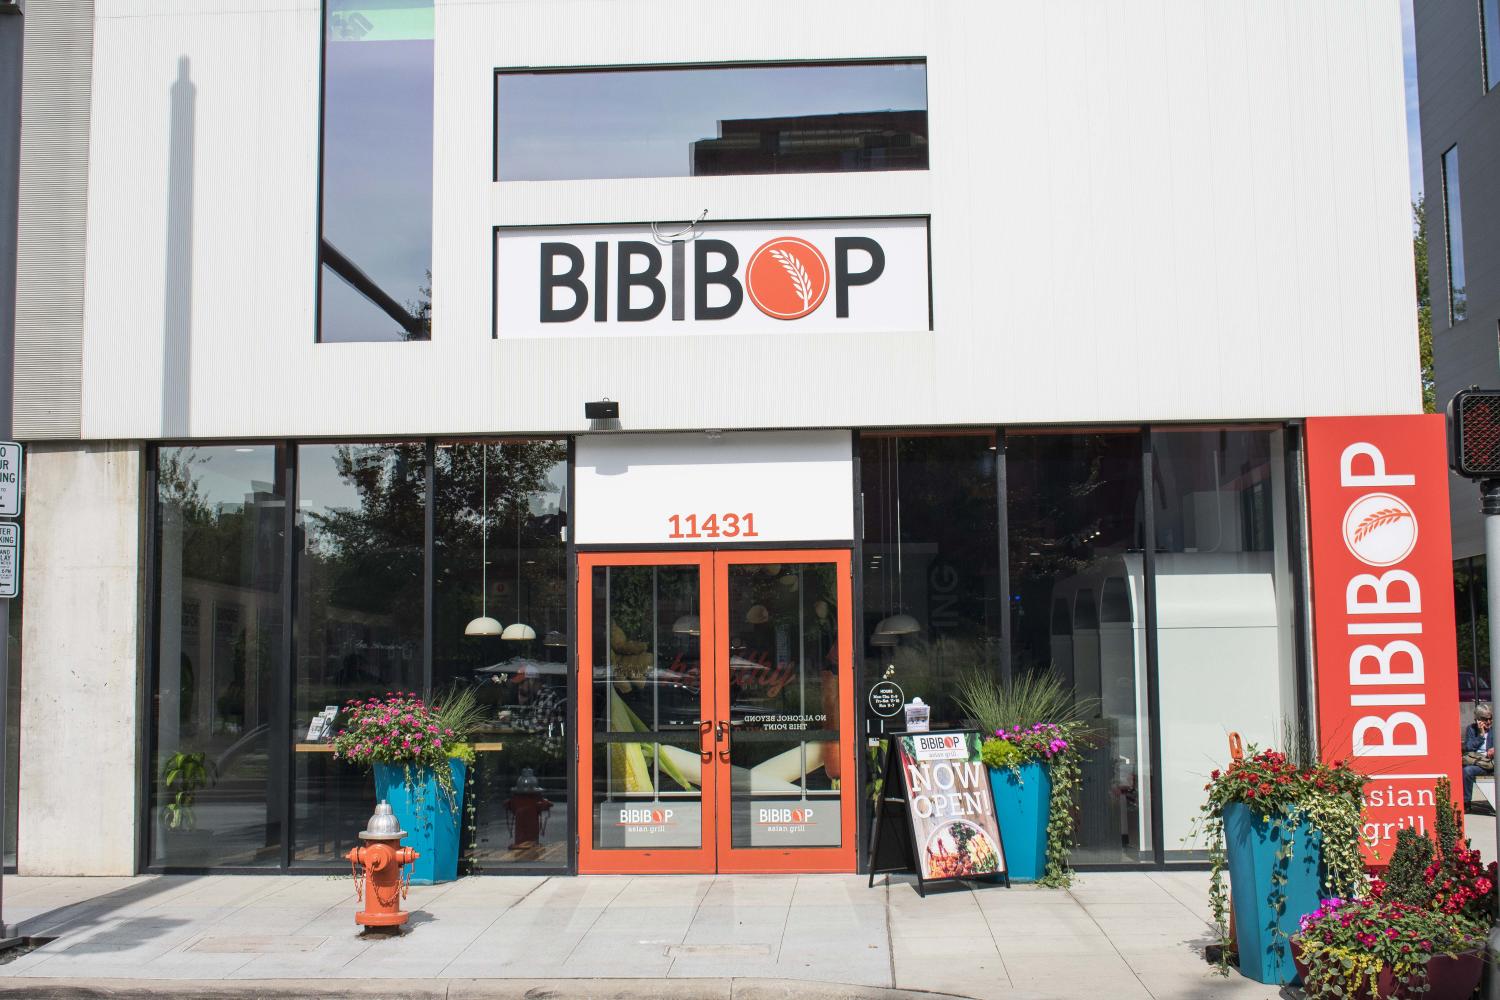 BIBIBOP%2C+in+the+heart+of+Uptown%2C+is+the+newest+addition+to+the+locations+easy+eateries.+